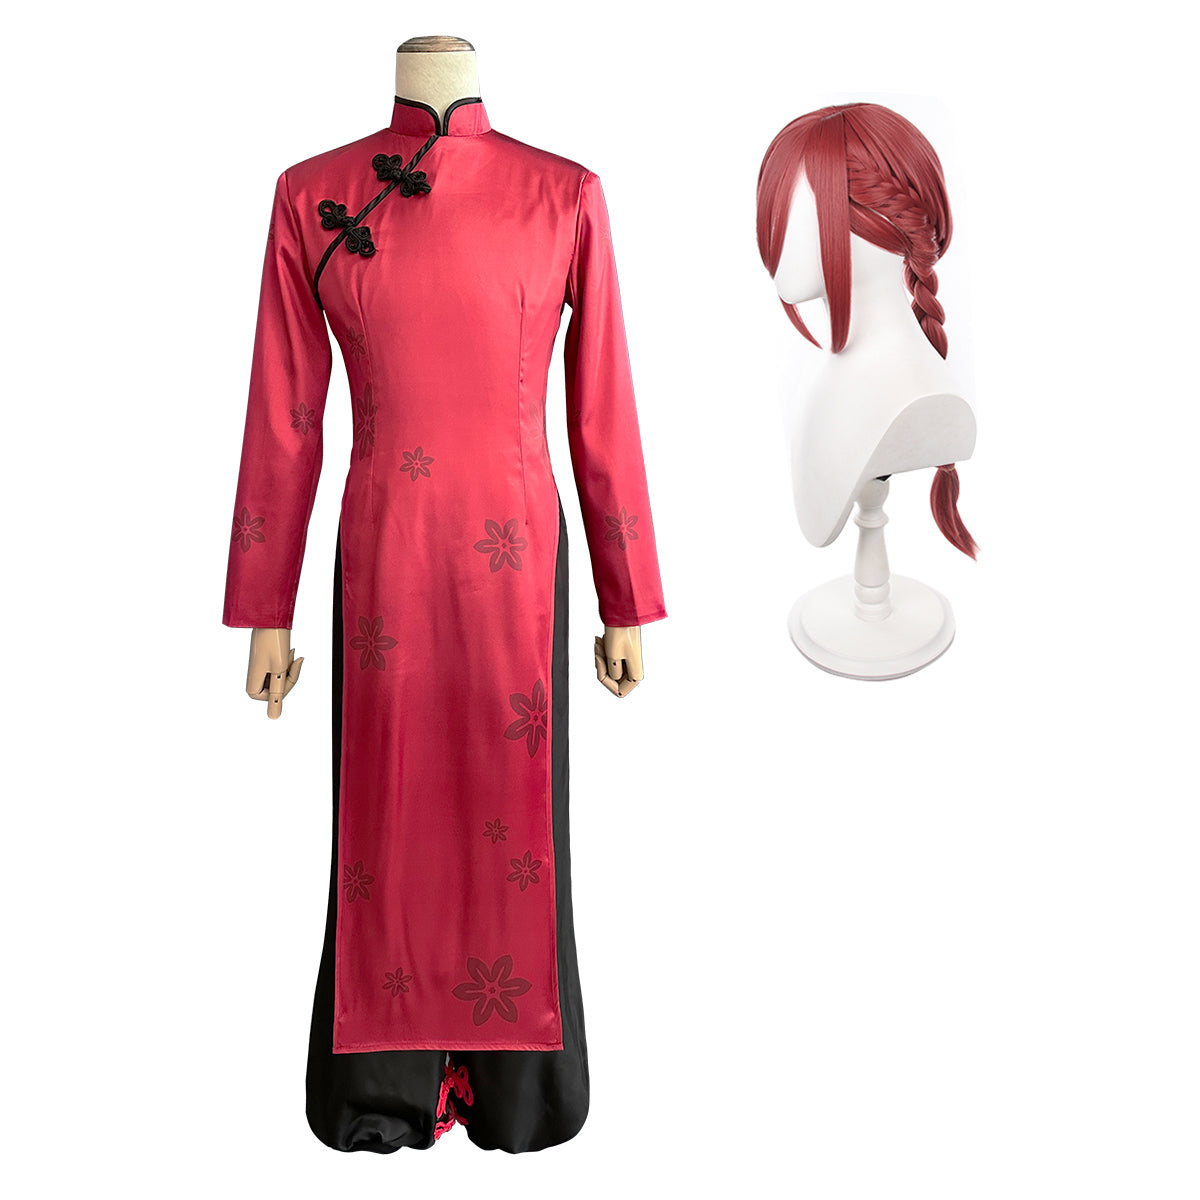 HOLOUN Blue Lock Anime Chigiri Cosplay China Costume Red Kung Fu Tang Suit Wig Rose Net Sythetic Fibers Adjustable Size Gift